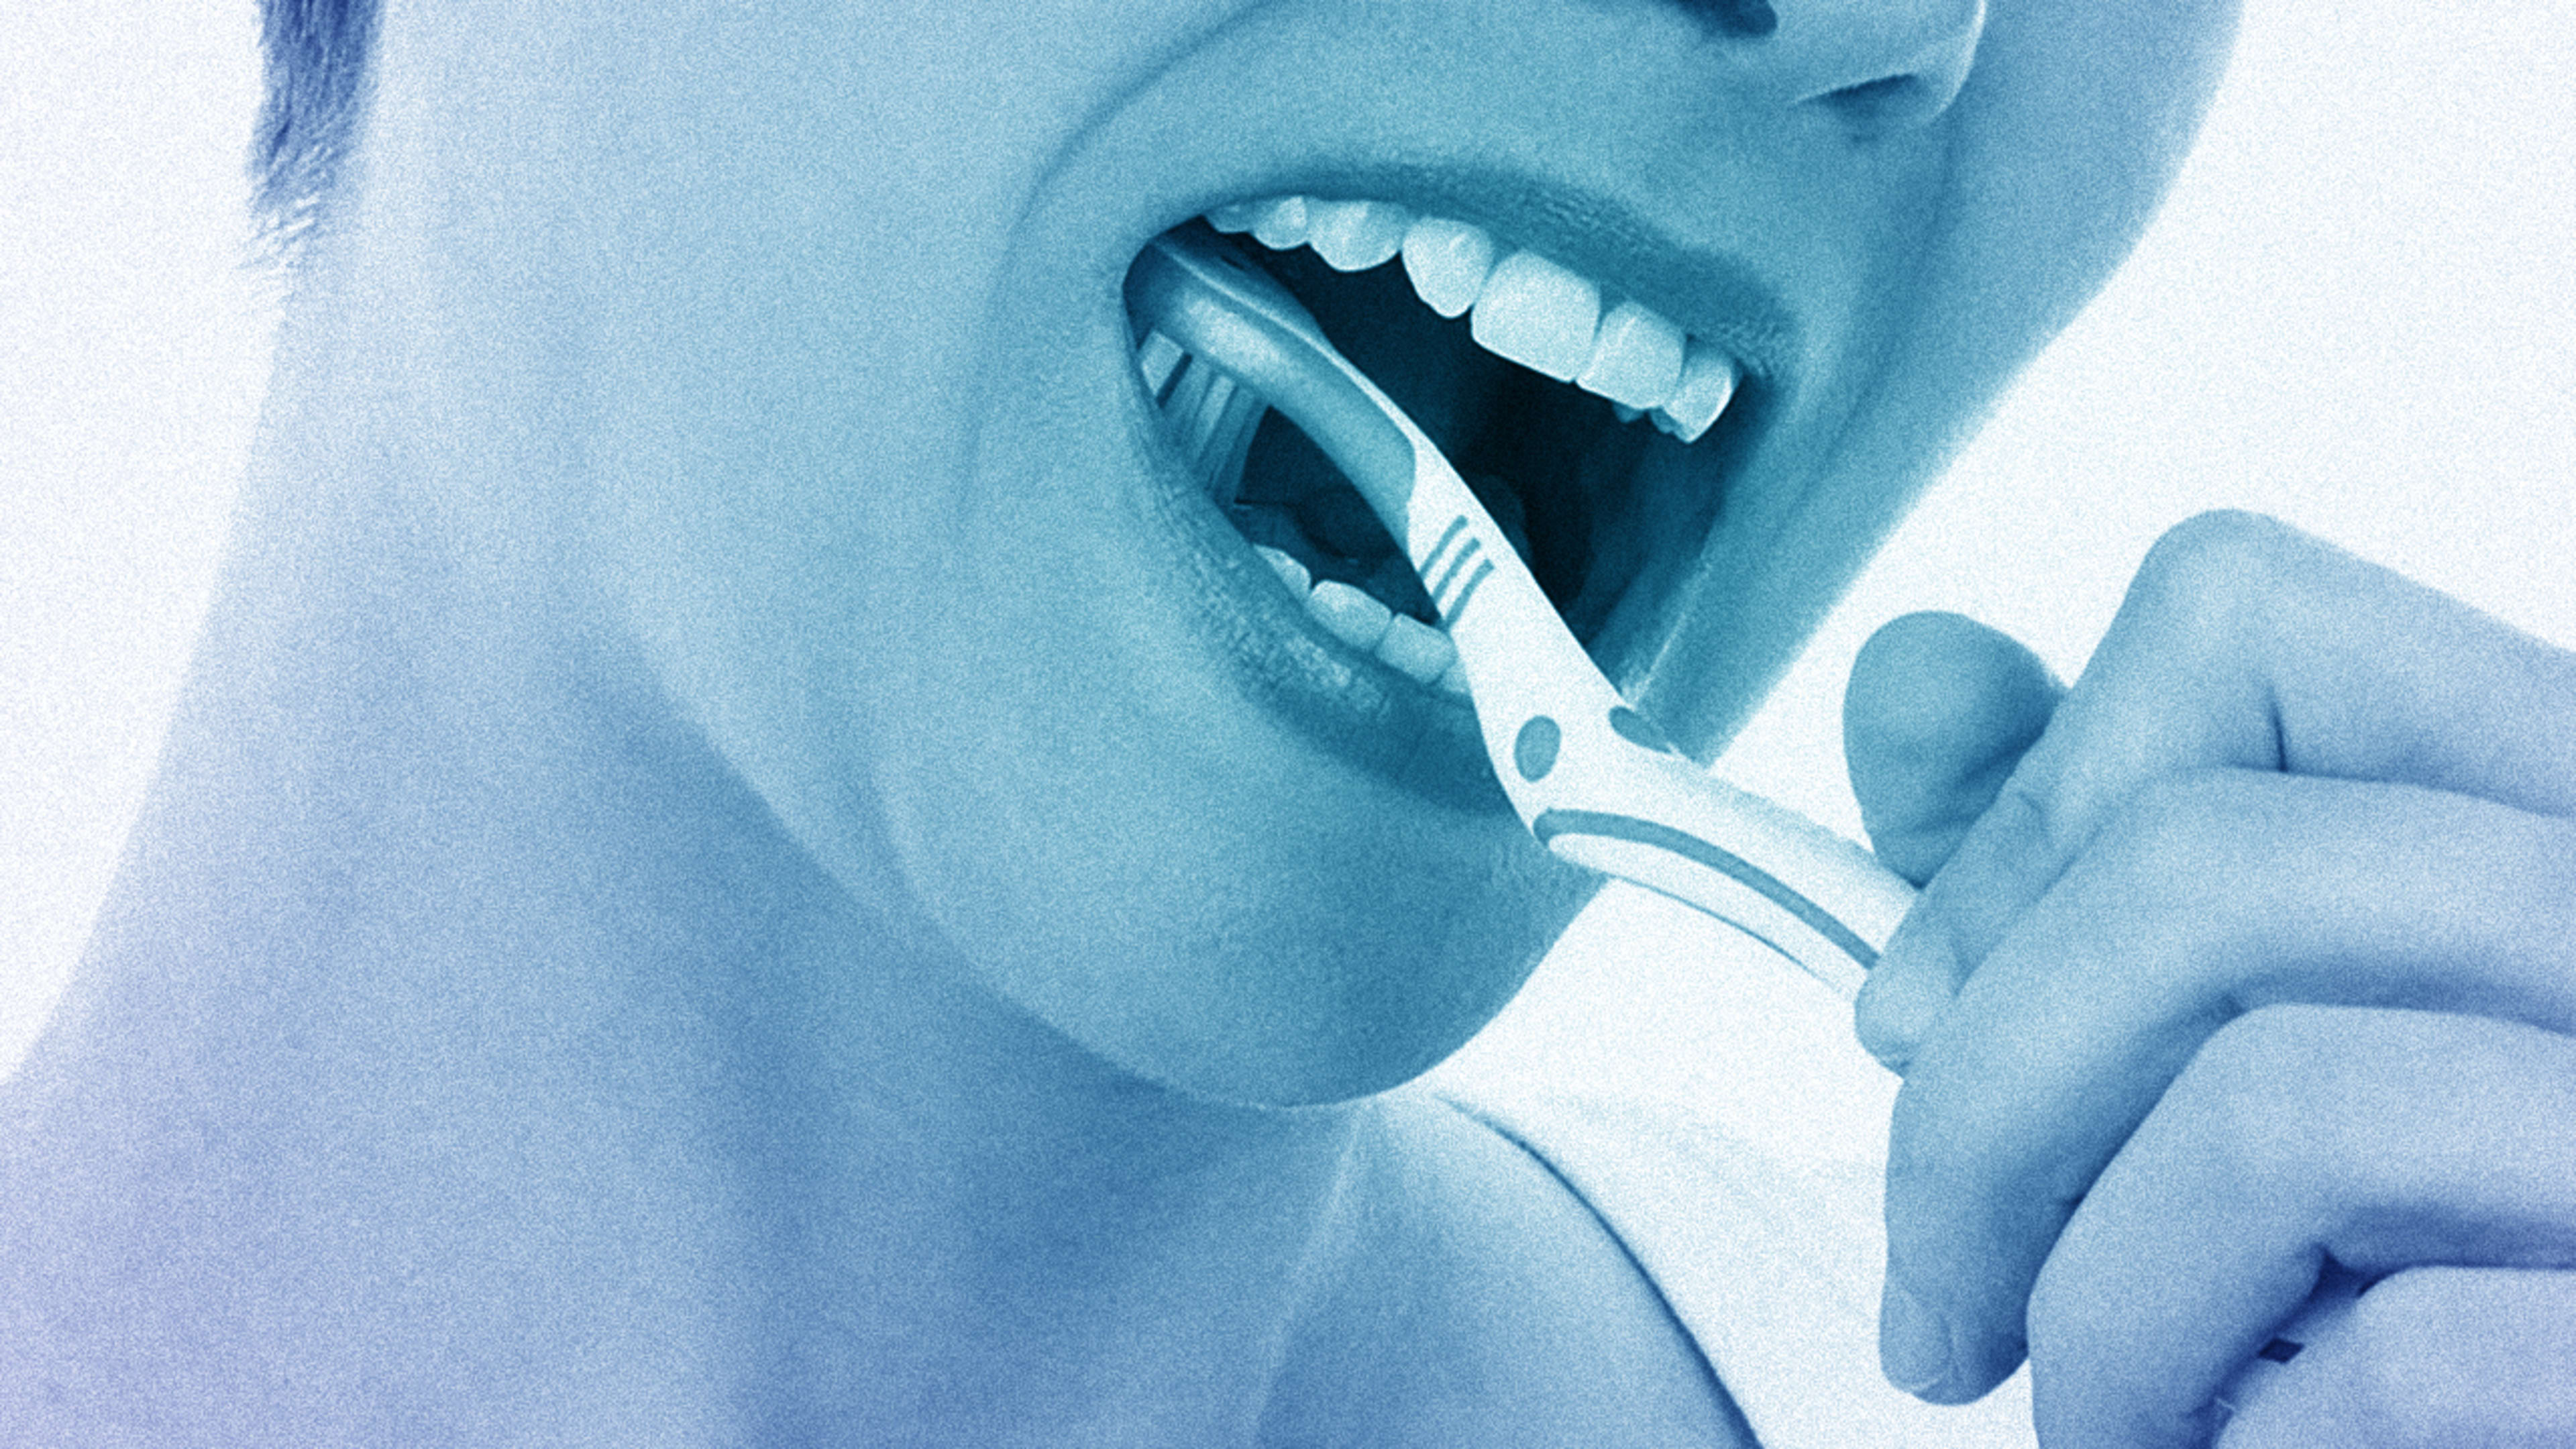 You’re not brushing your teeth enough. Three times a day keeps the heart attack away